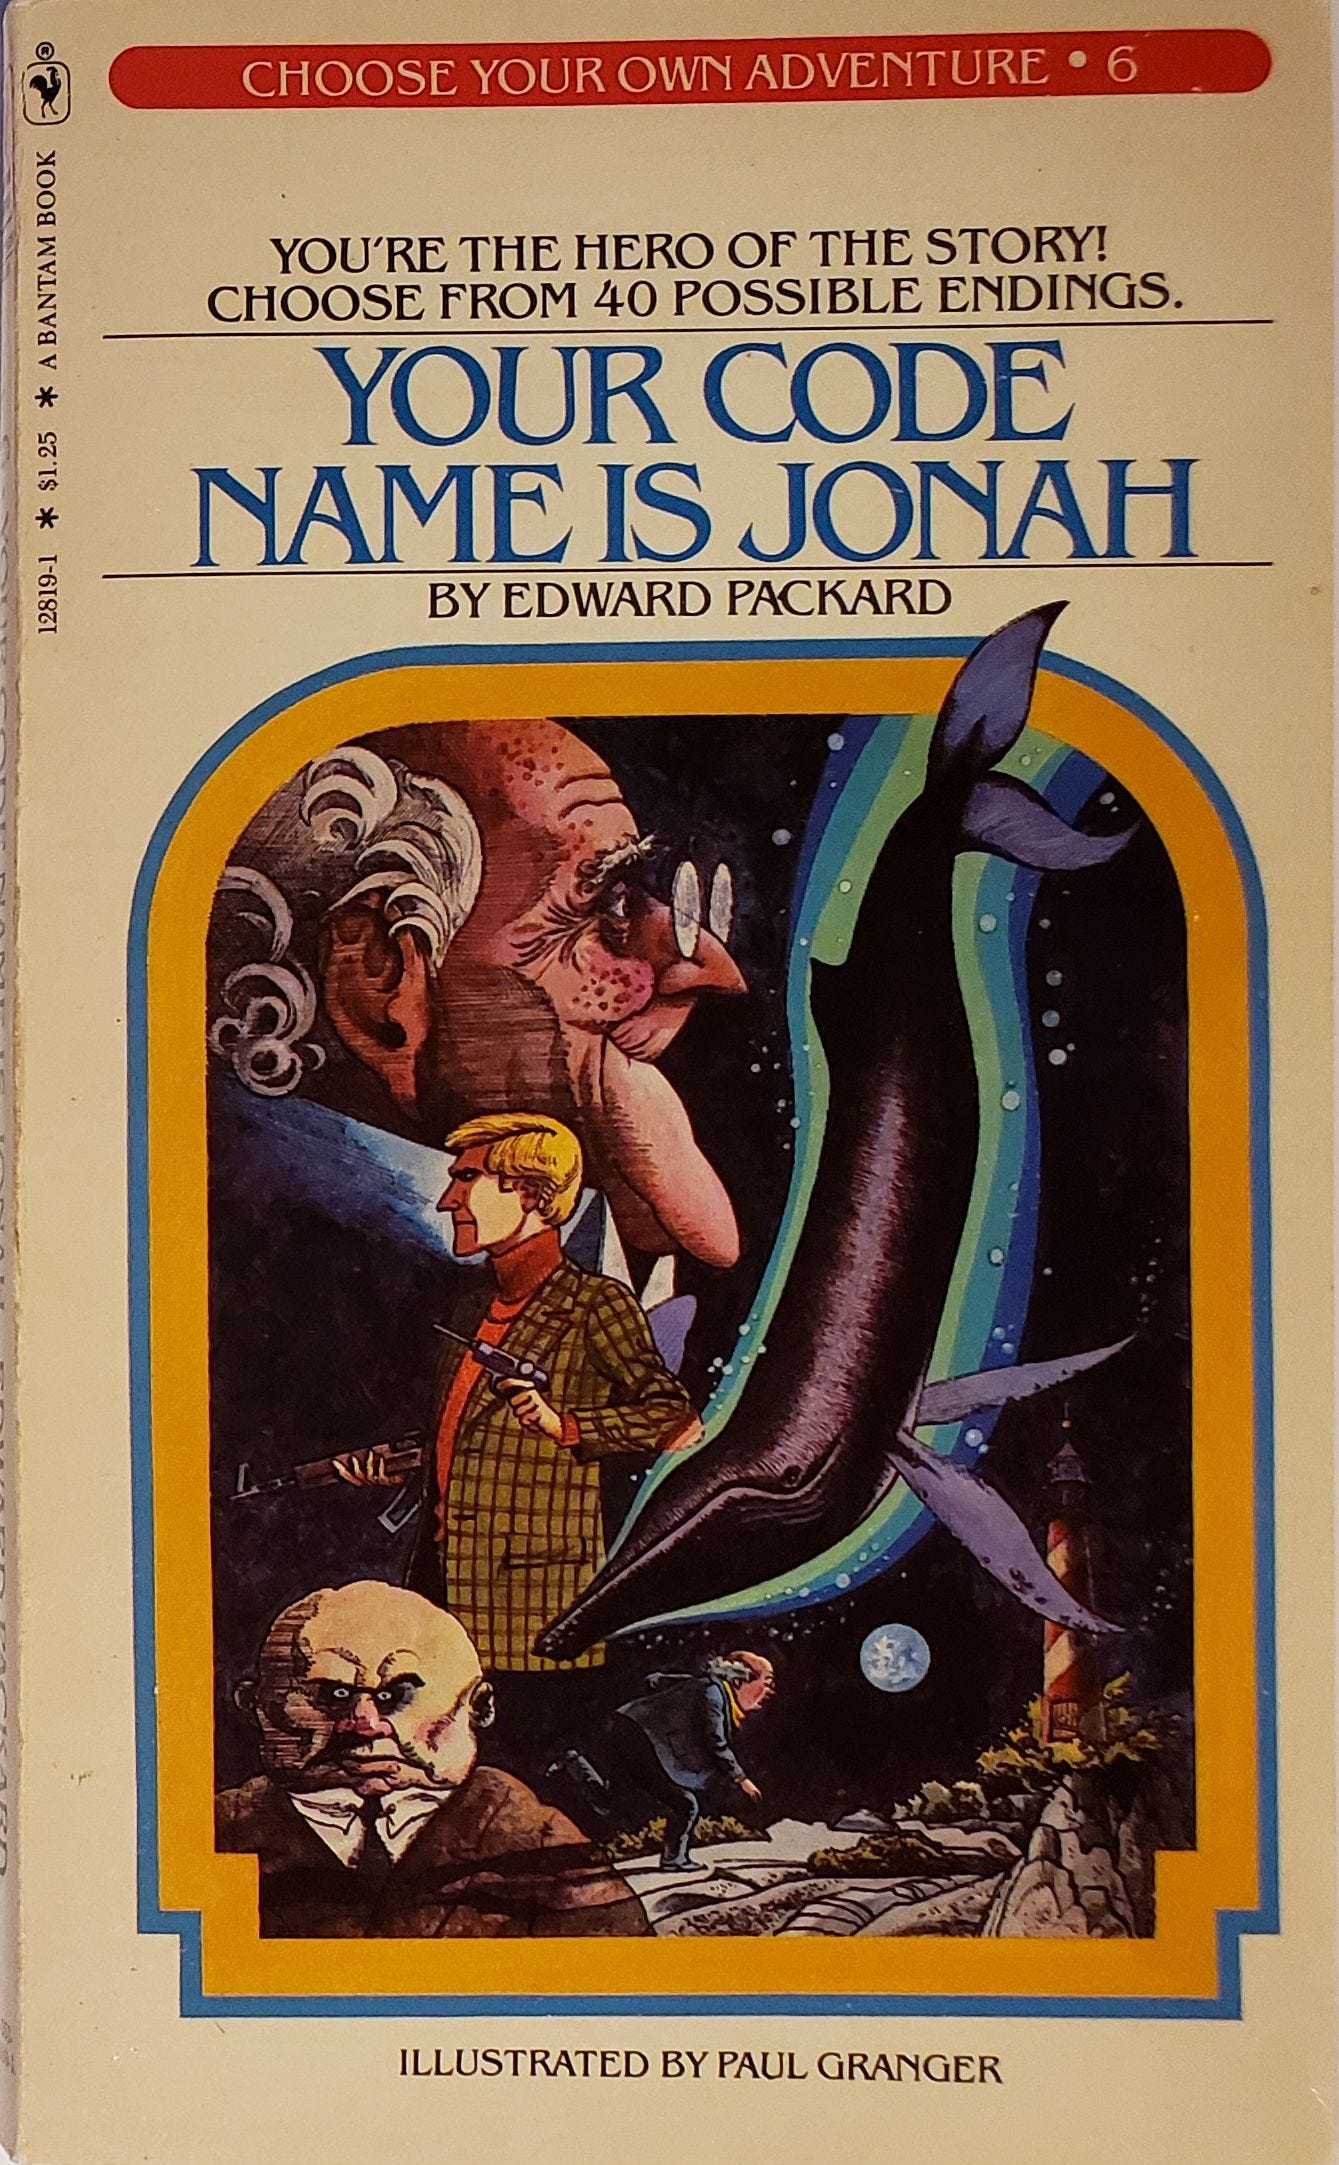 Cover of a Choose Your Own Adventure book titled Your Code Name is Jonah by Edward Packard. The illustration is a fantasy-type collage showing faces, a dolphin, a person approaching a lighthouse, and a dark sky with a moon